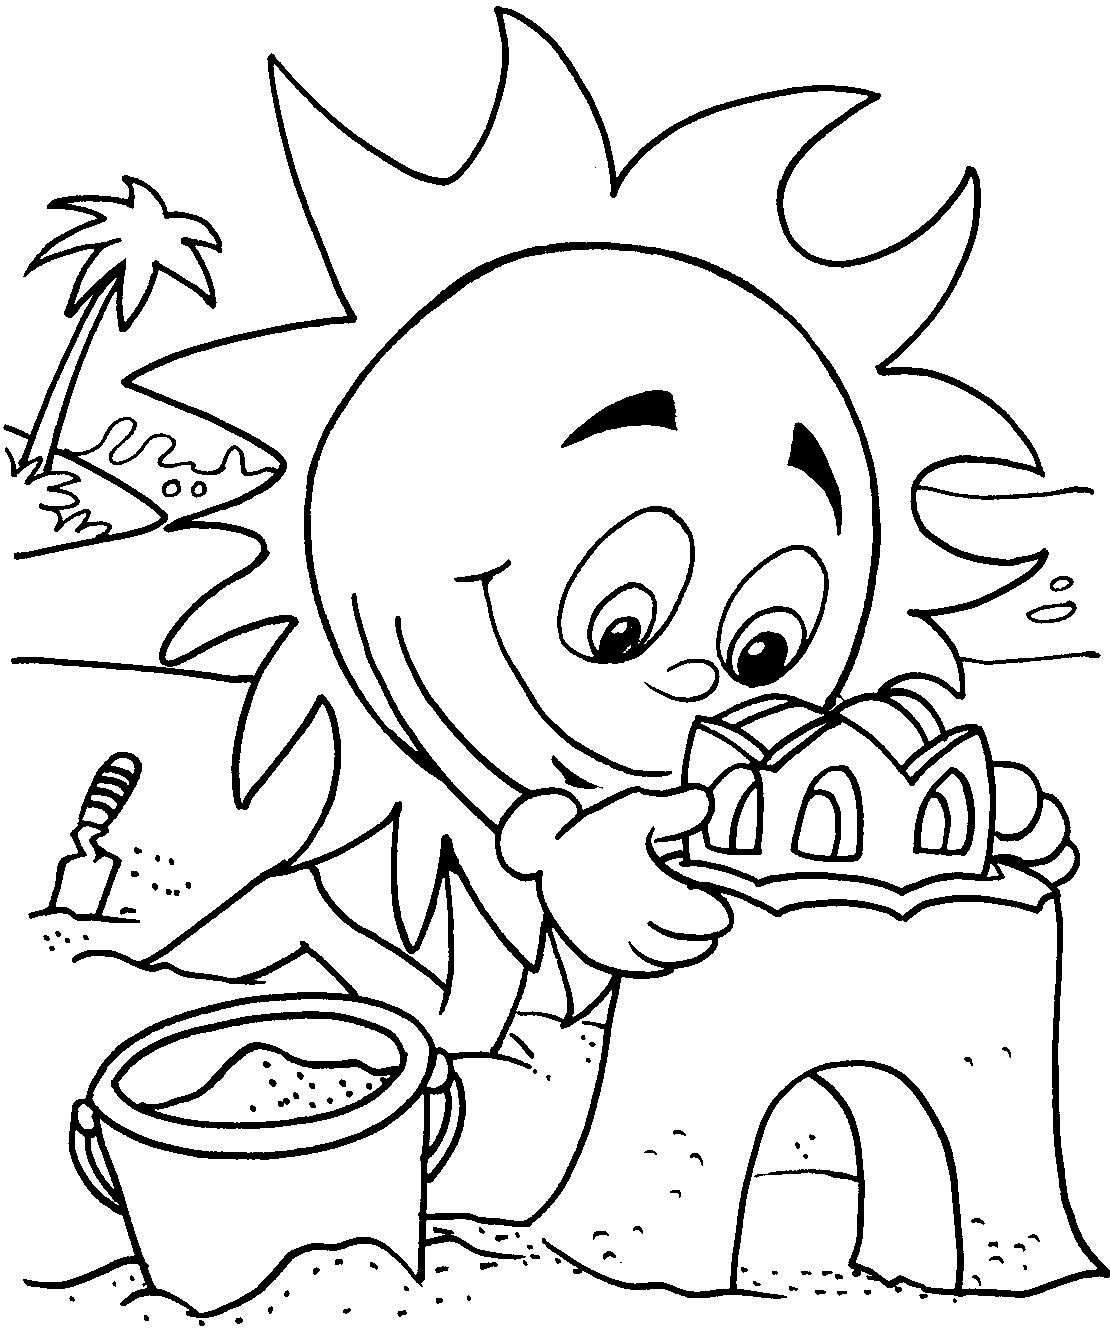 Sun at beach coloring page | Download Free Sun at beach coloring page